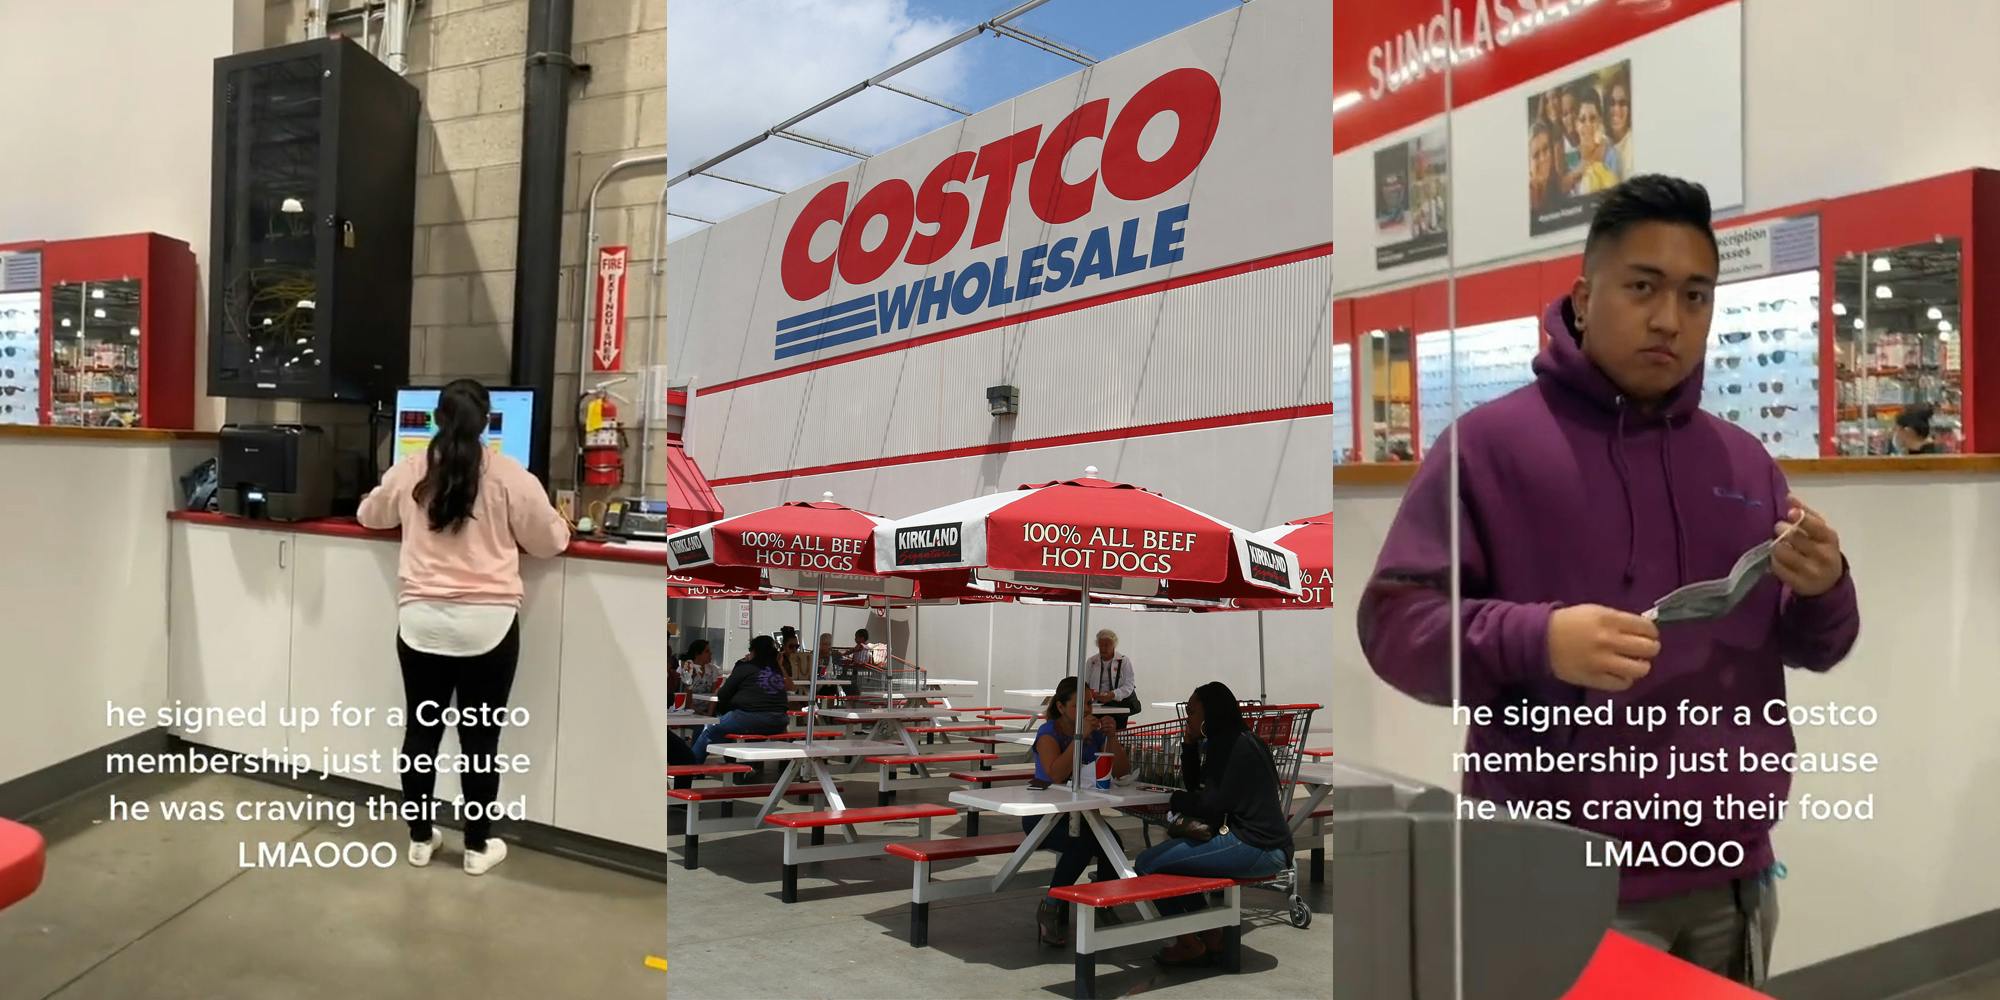 Costco employee with caption "he signed up for a Costco membership just because he was craving their food LMAOOO" (l) Costco outdoor food court (c) Costco employee with caption "he signed up for a Costco membership just because he was craving their food LMAOOO" (r)